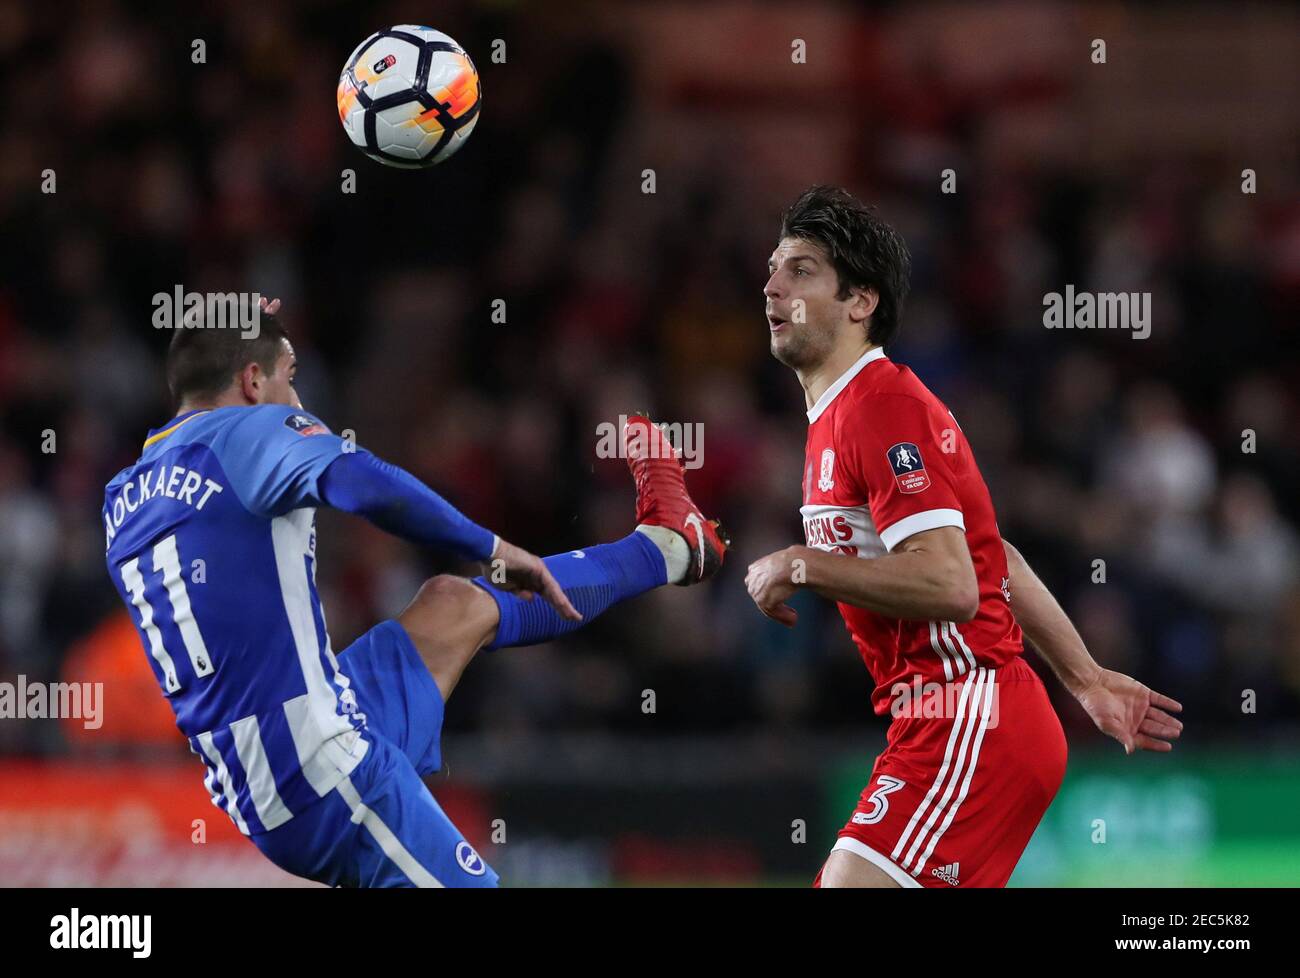 Soccer Football - FA Cup Fourth Round - Middlesbrough vs Brighton & Hove Albion - Riverside Stadium, Middlesbrough, Britain - January 27, 2018   Middlesbrough's George Friend in action with Brighton's Anthony Knockaert   REUTERS/Scott Heppell Stock Photo